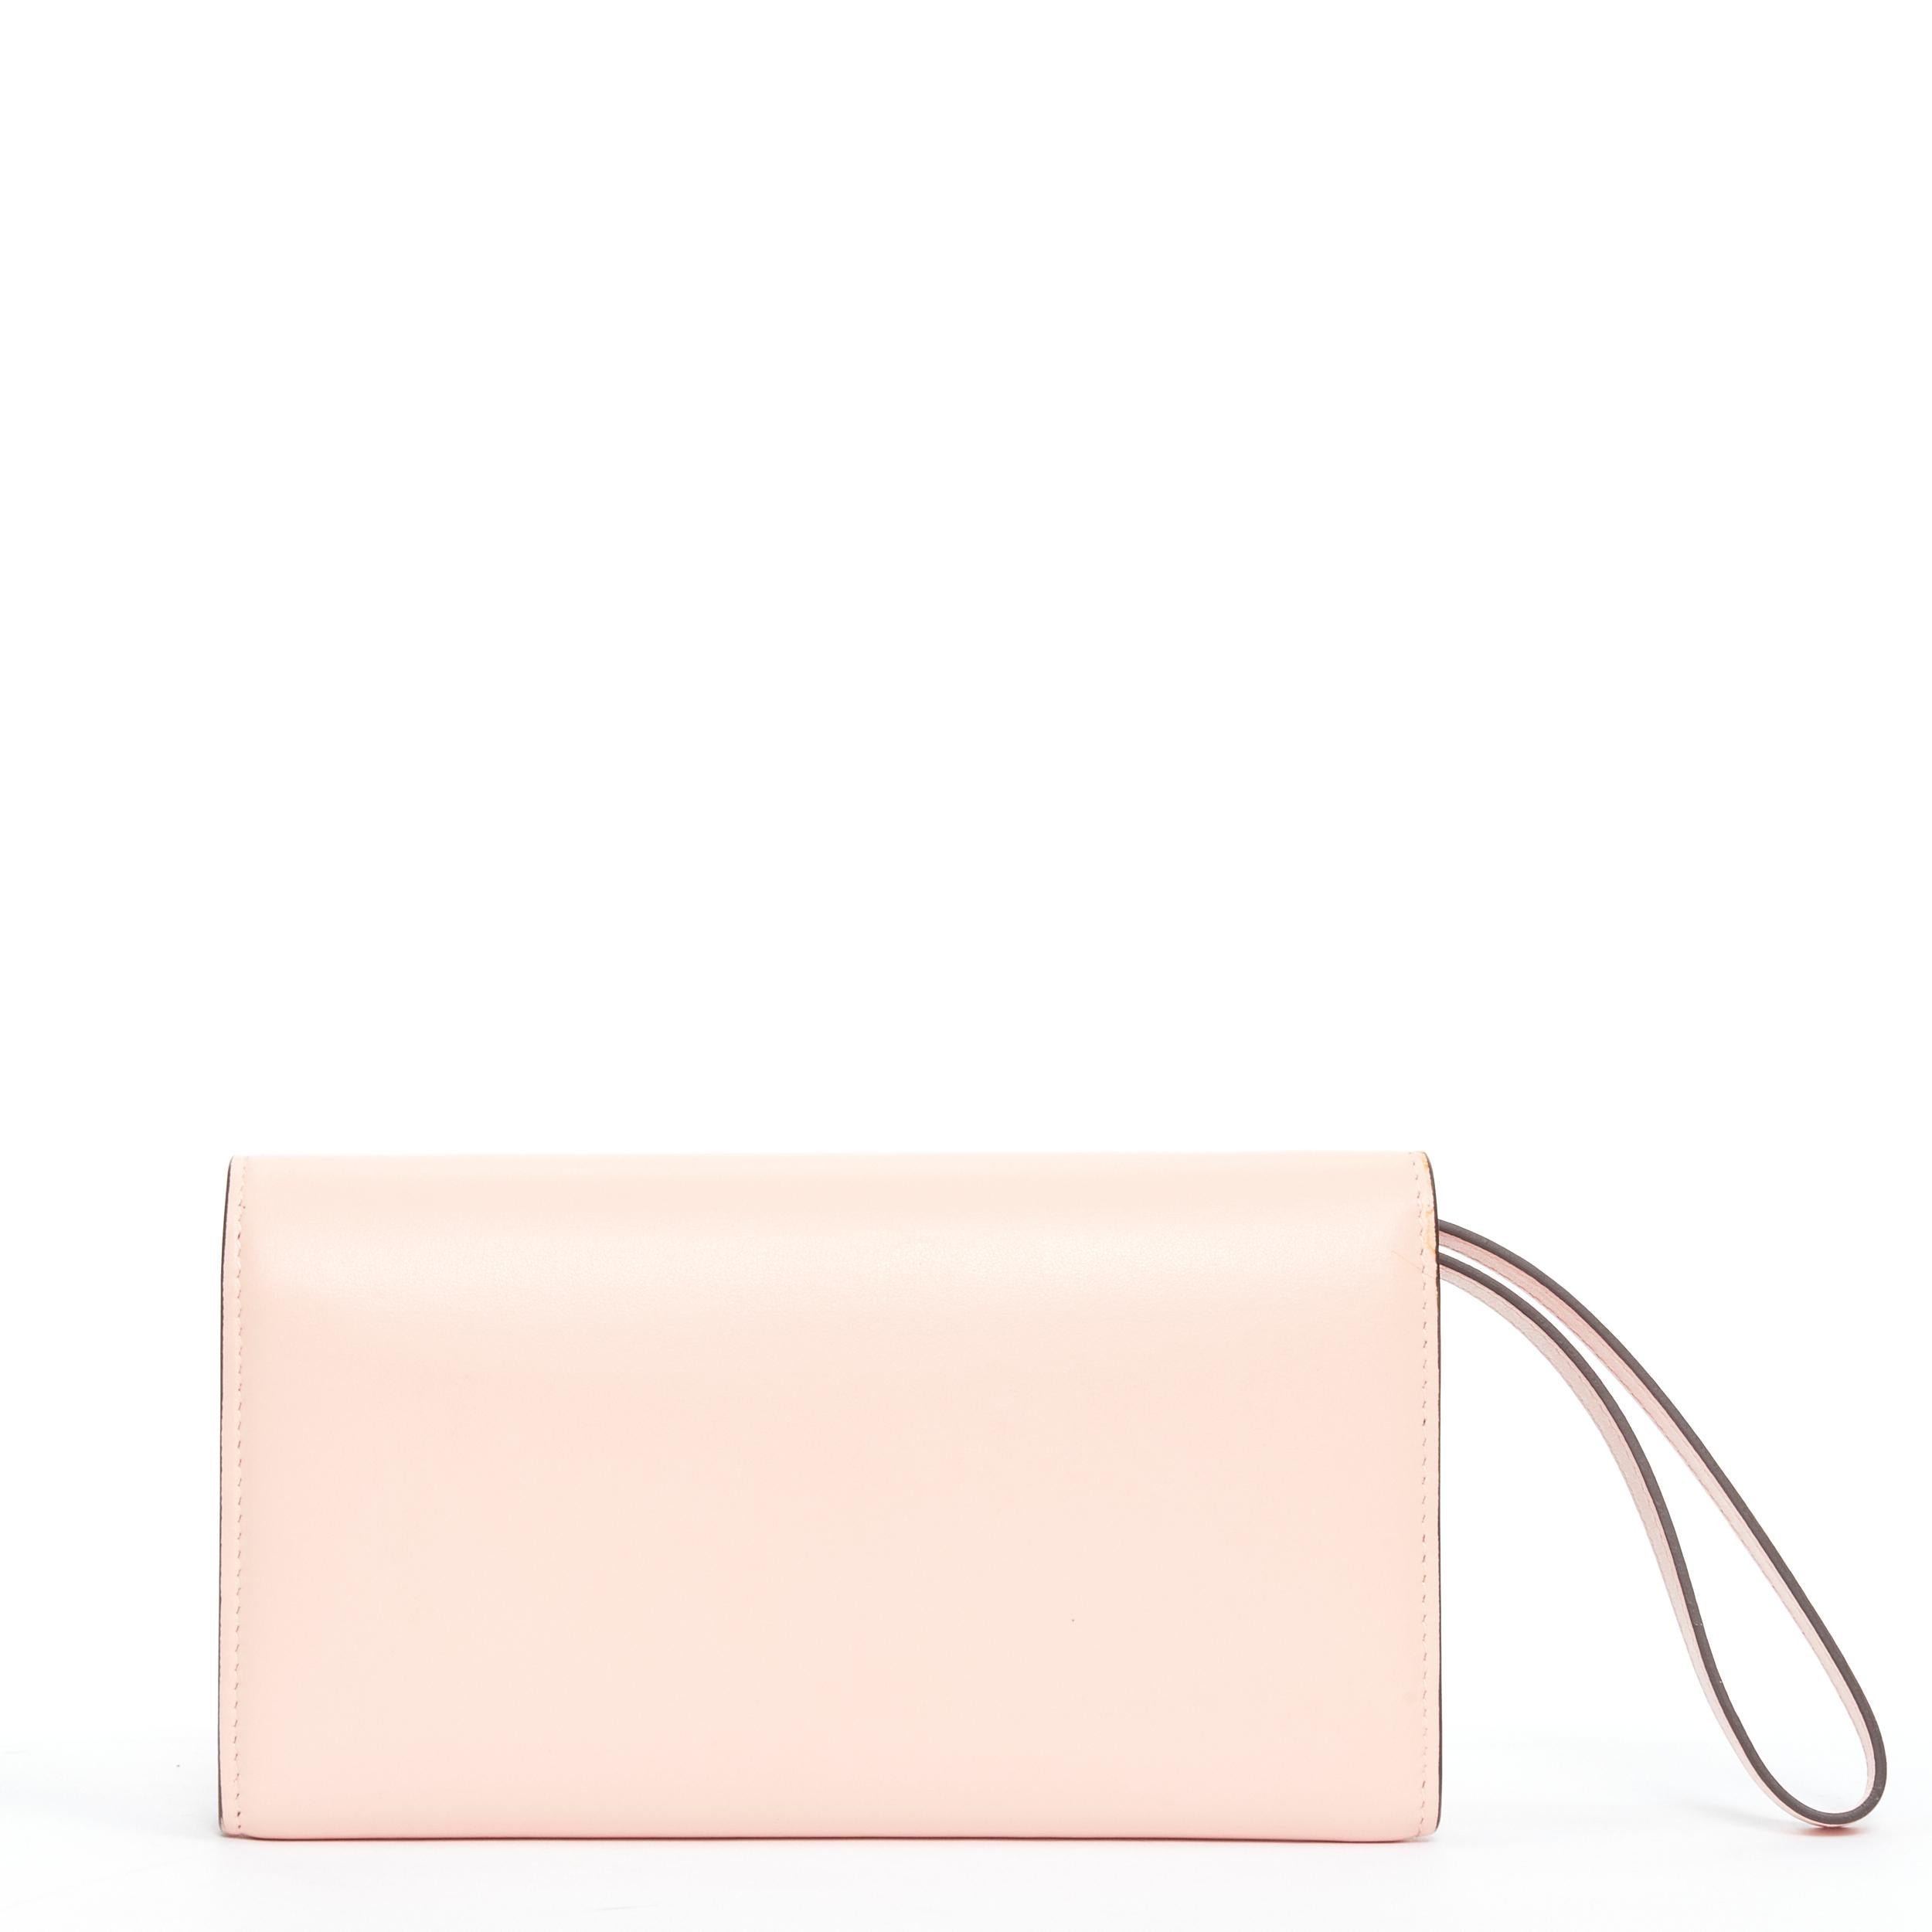 new CHRISTIAN LOUBOUTIN Macaron pink gold spike stud flap wallet clutch bag 
Reference: TGAS/B01397 
Brand: Christian Louboutin 
Designer: Christian Louboutin 
Material: Leather 
Color: Pink 
Pattern: Solid 
Closure: Button 
Extra Detail: Macaron